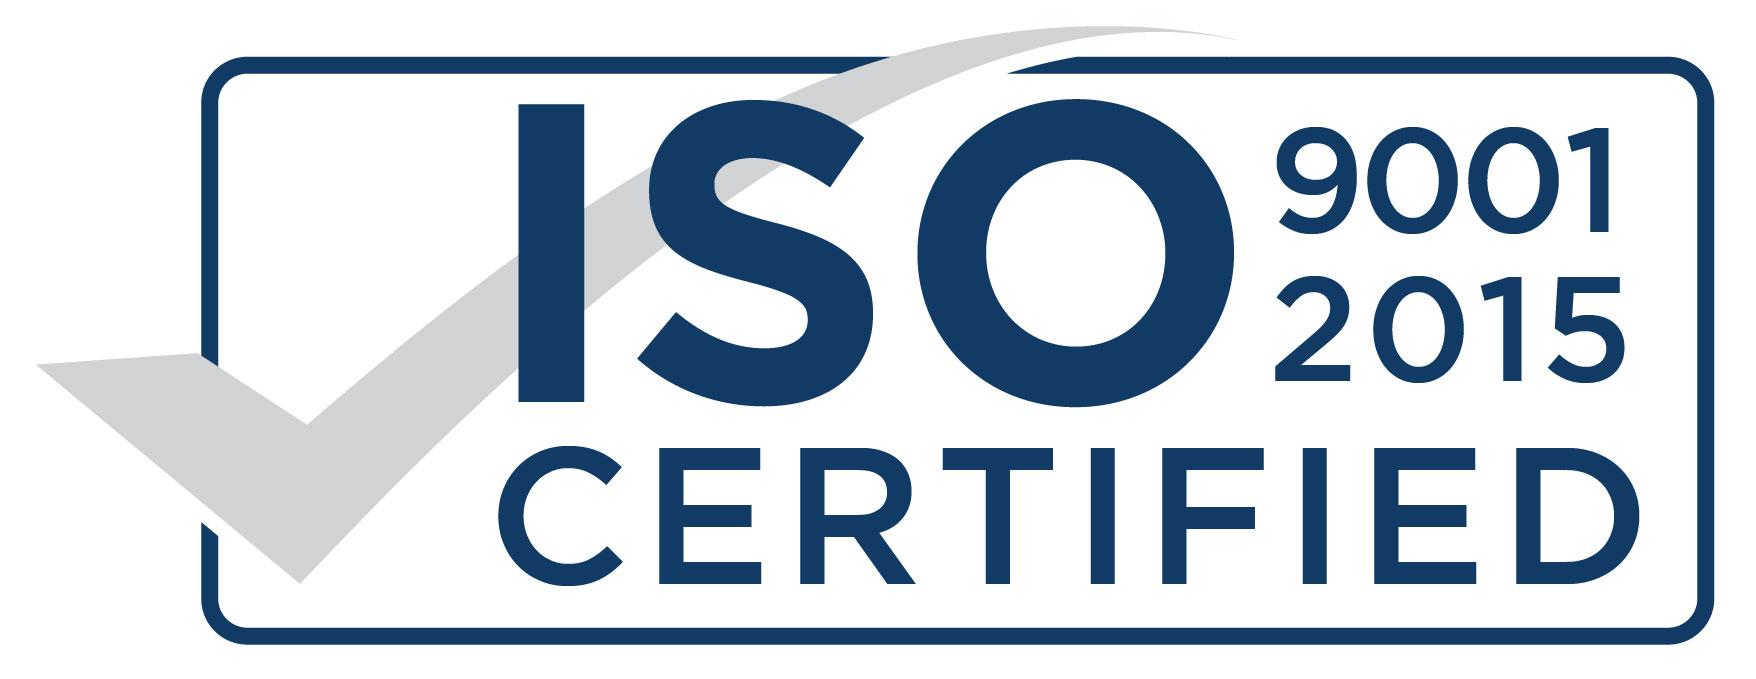 PRISAFETY: ISO 9001:2015 Certified,20 Years of Expertise in Safety Glove Manufacturing